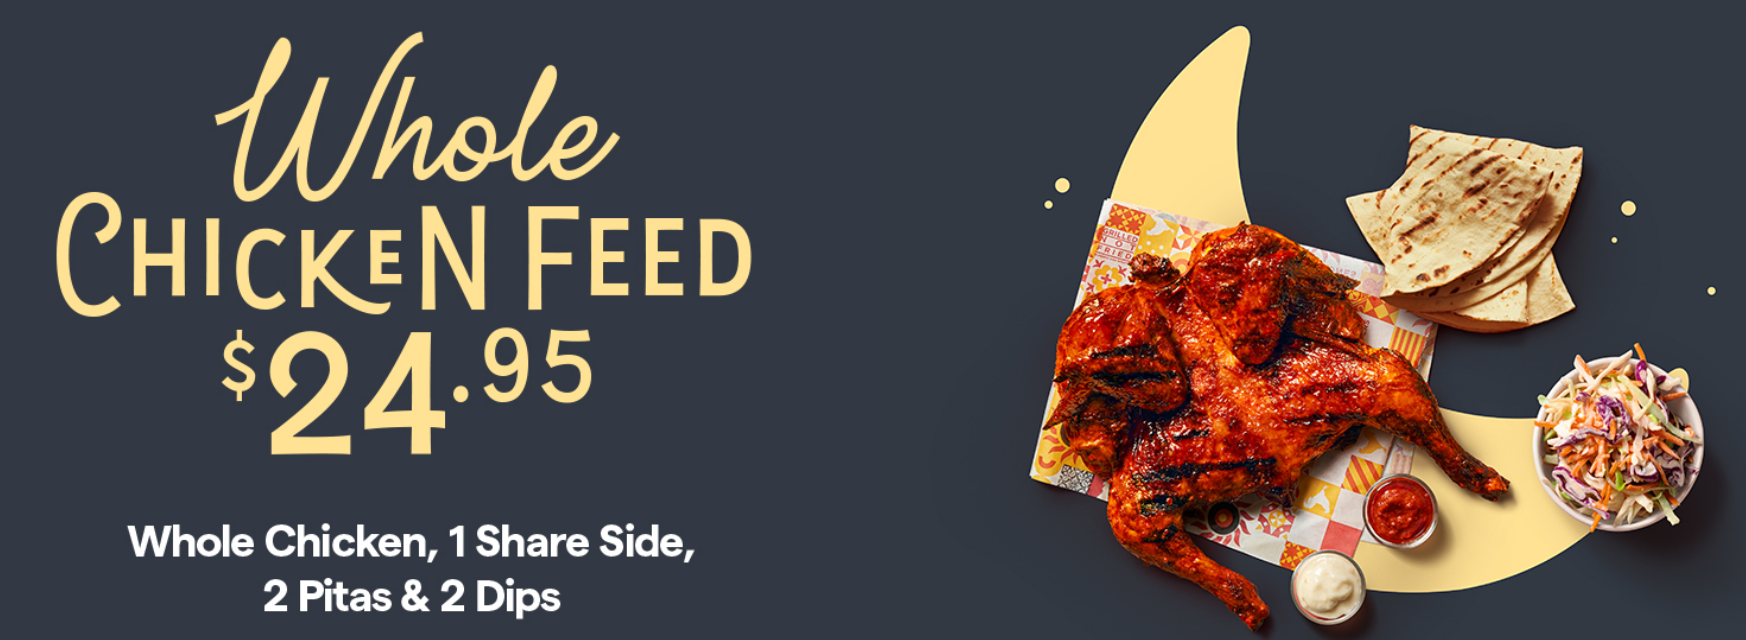 Get Whole Chicken Feed $24.95 at Oporto